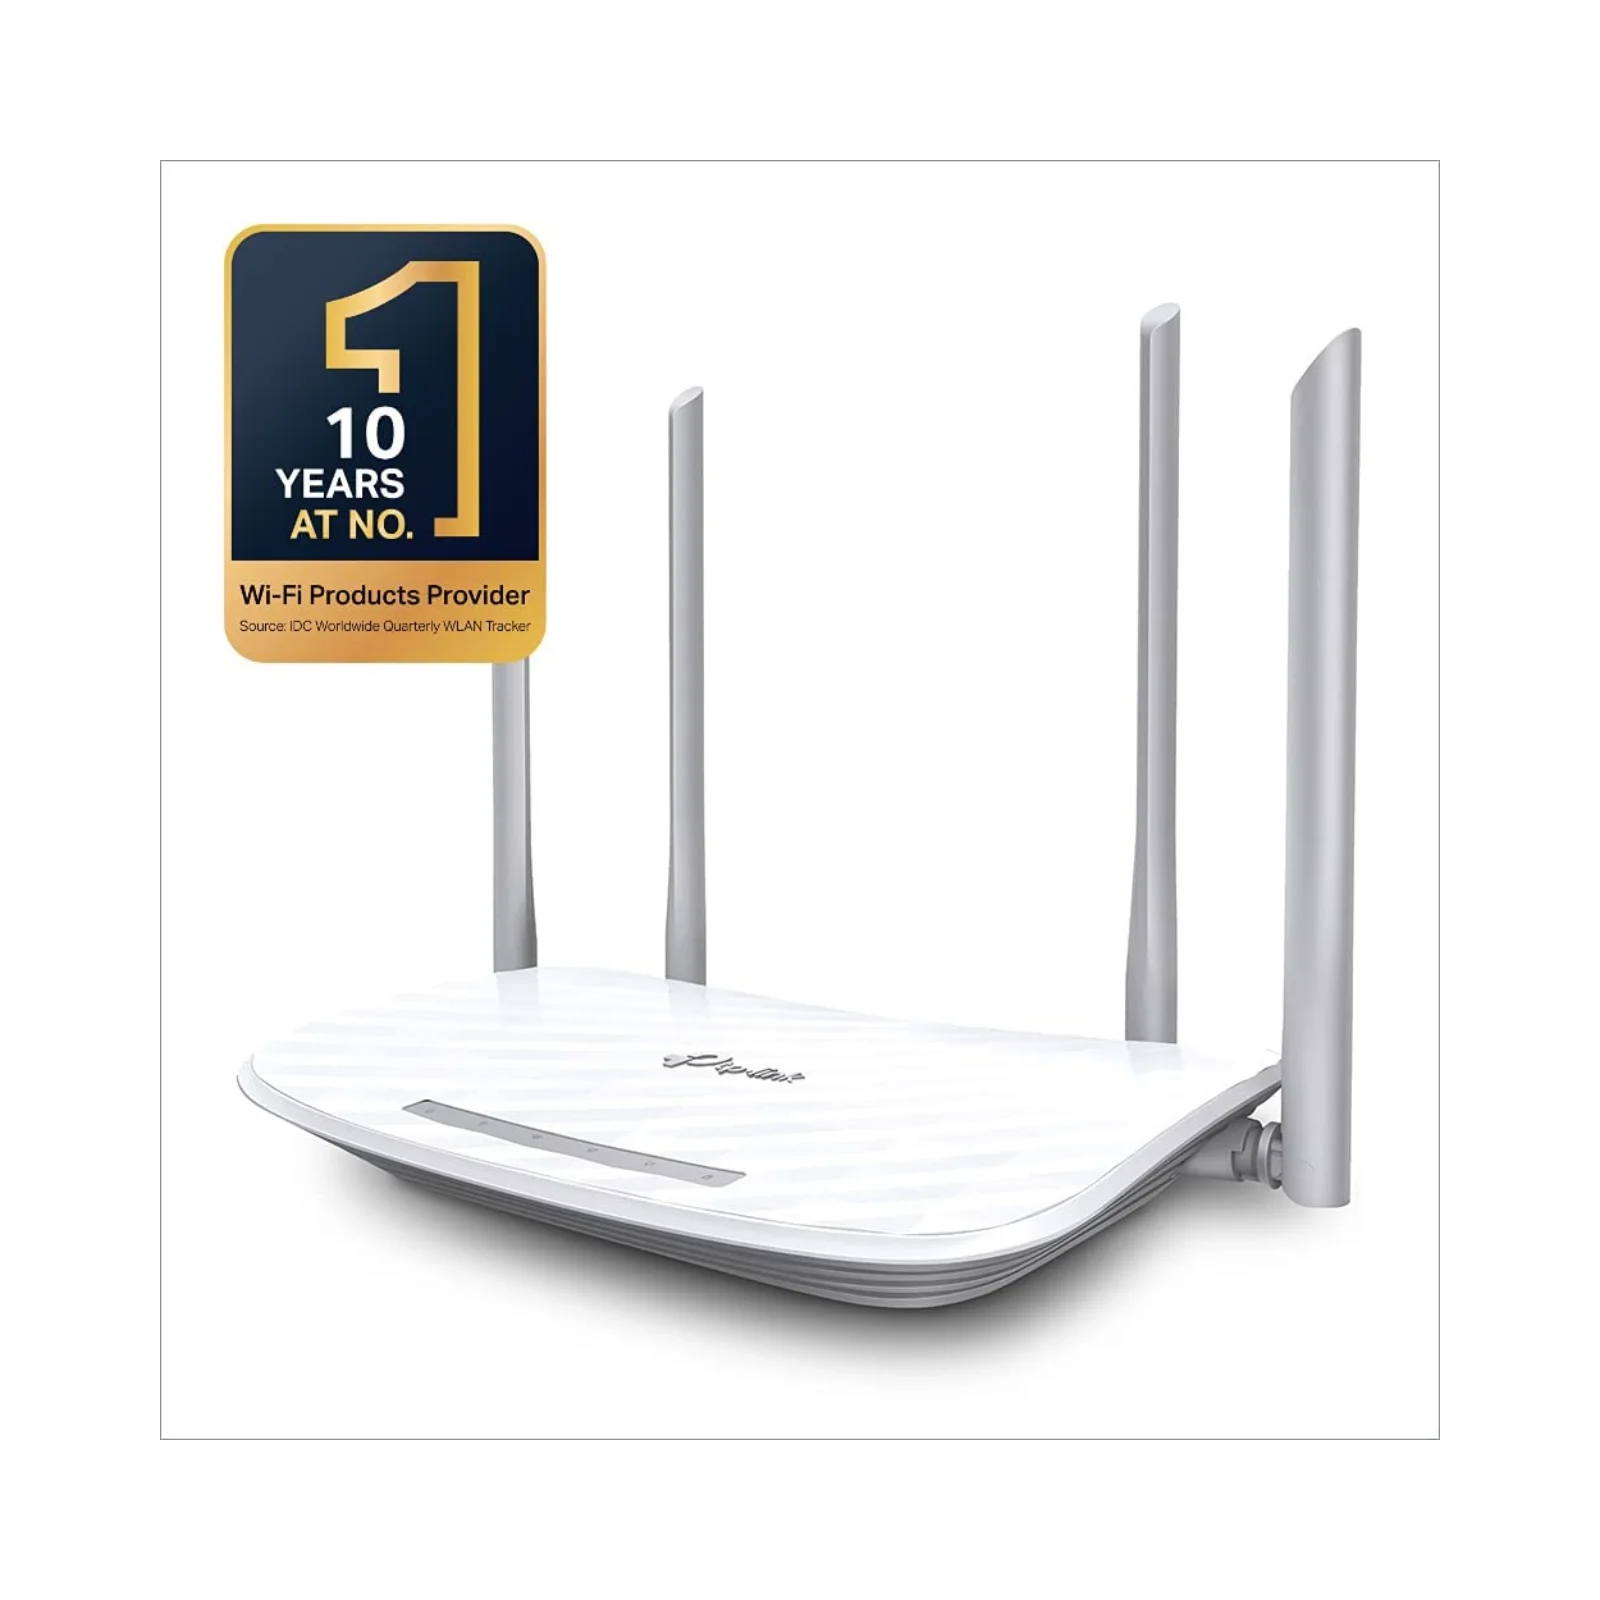 TP-Link Archer C50 V6 Wireless Dual Band Router AC1200Mbps Acces Point Router